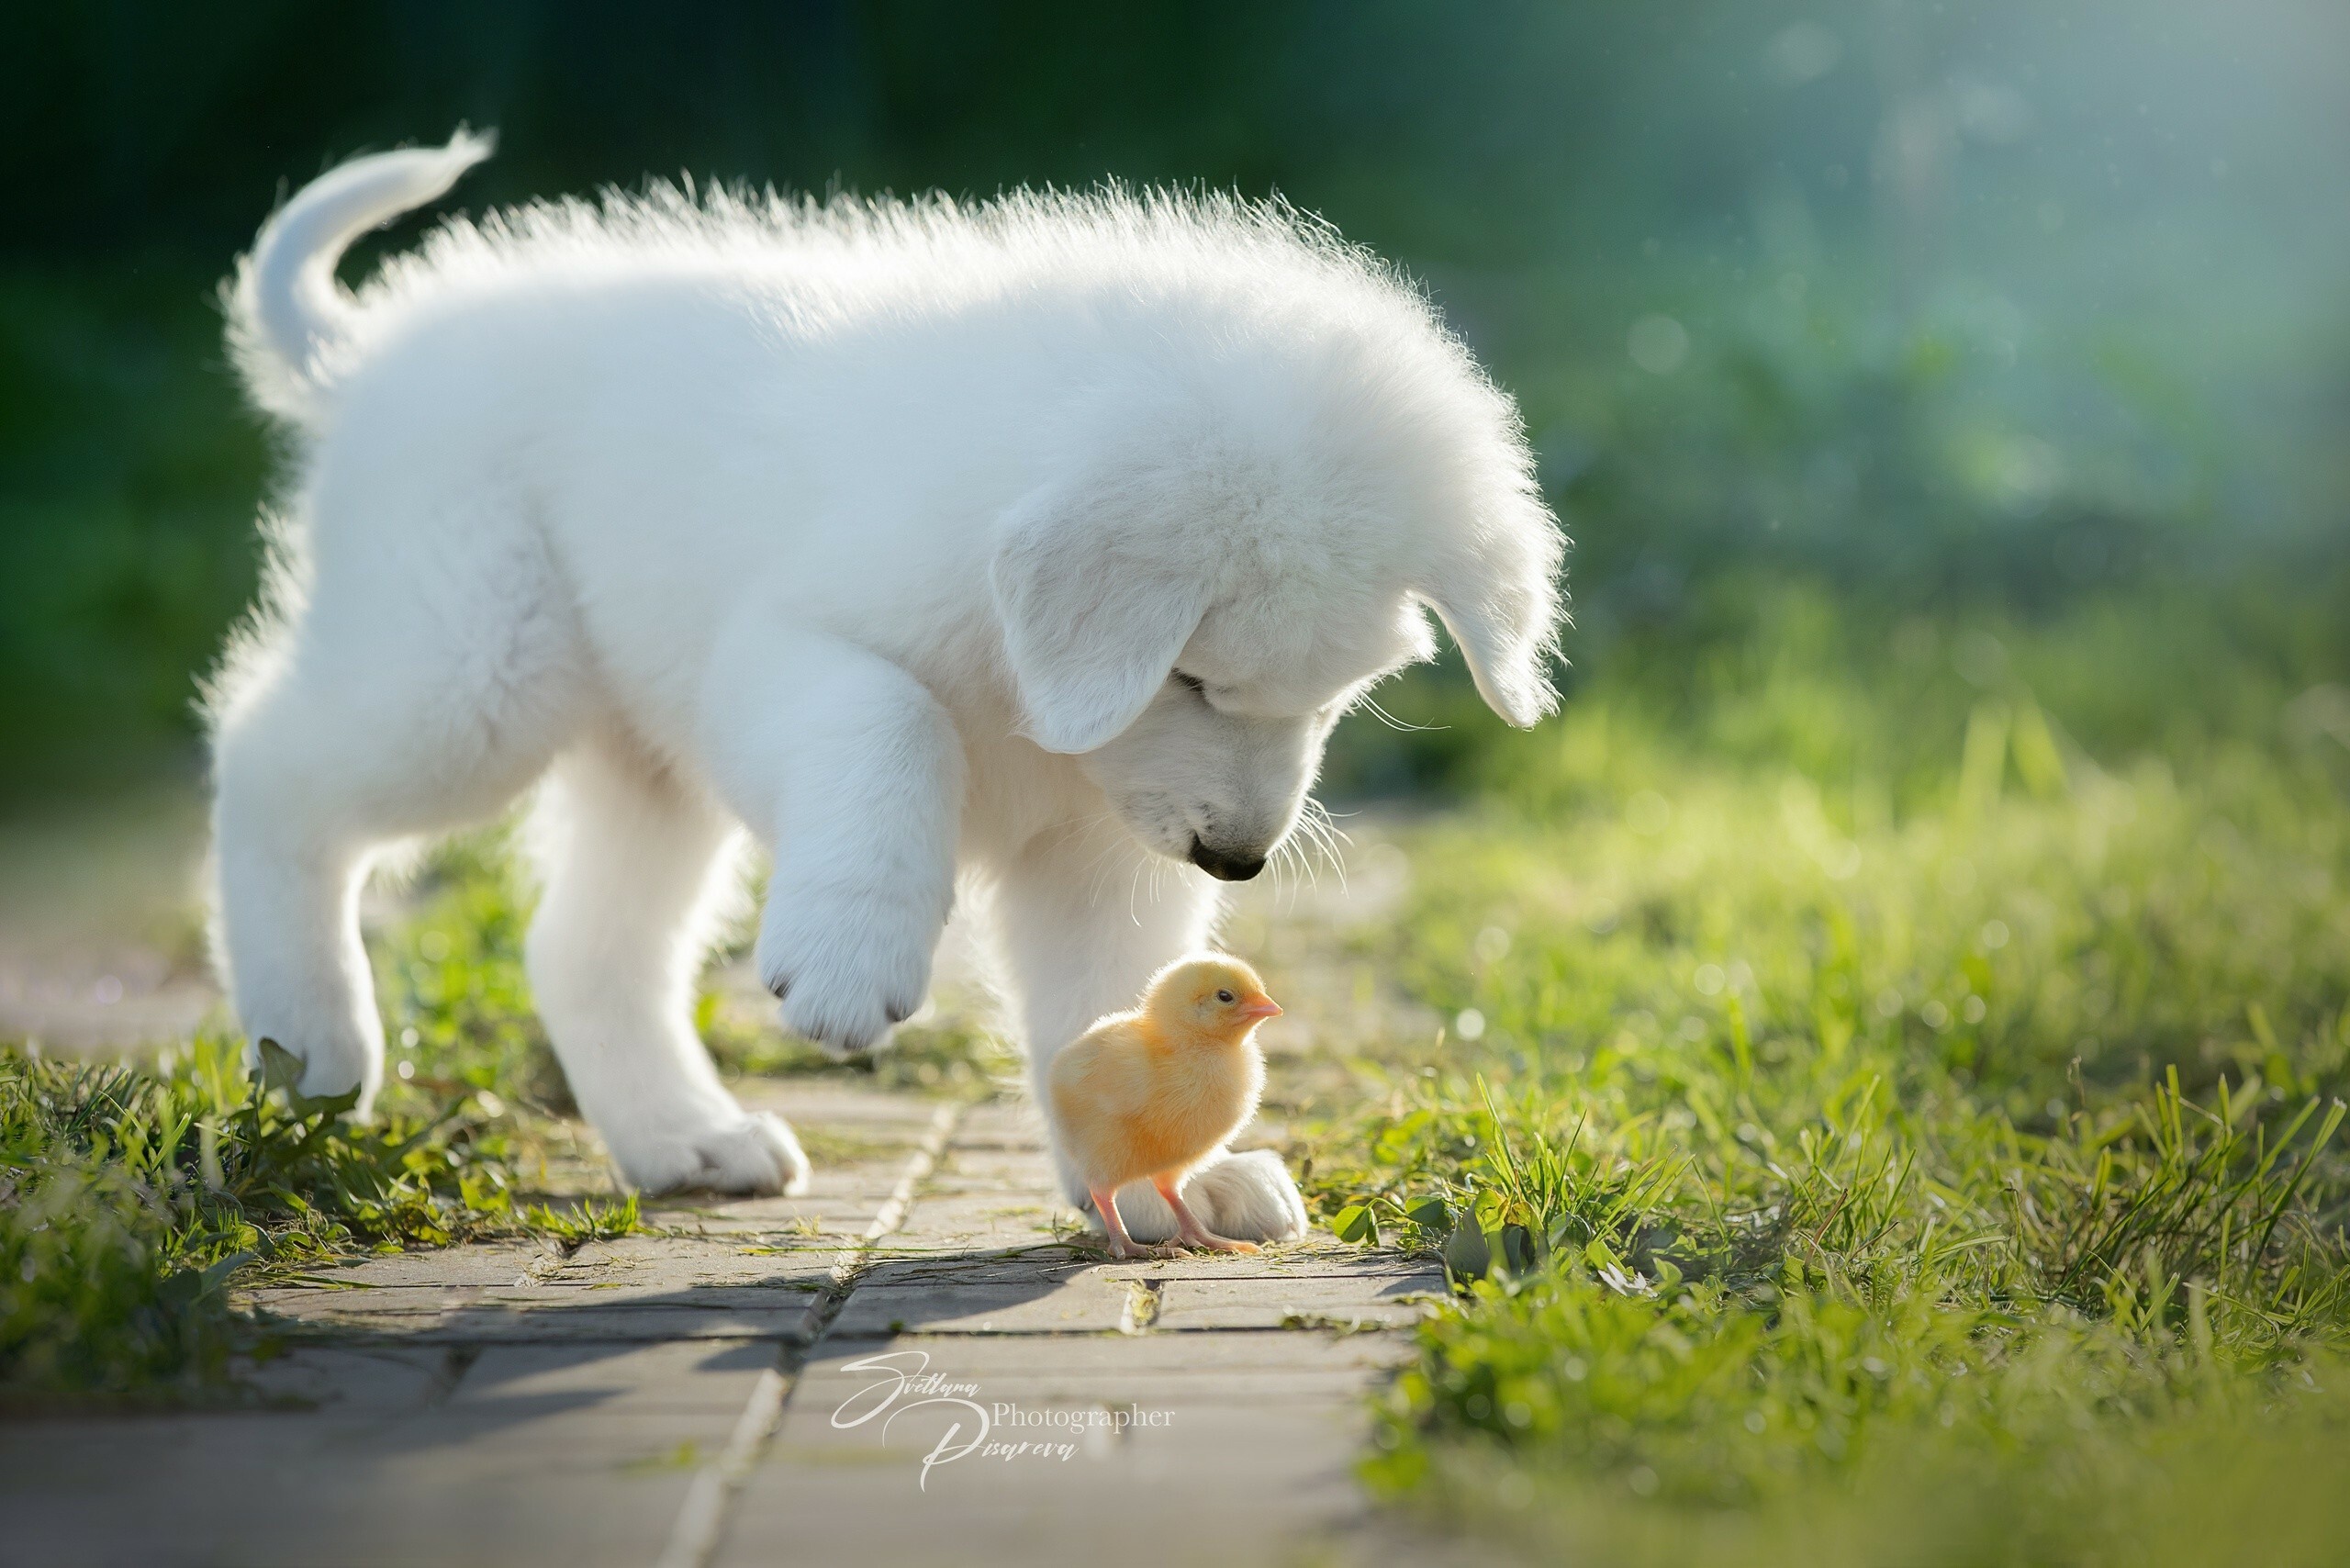 Puppy: A domesticated canine mammal, Young dog. 2560x1710 HD Wallpaper.